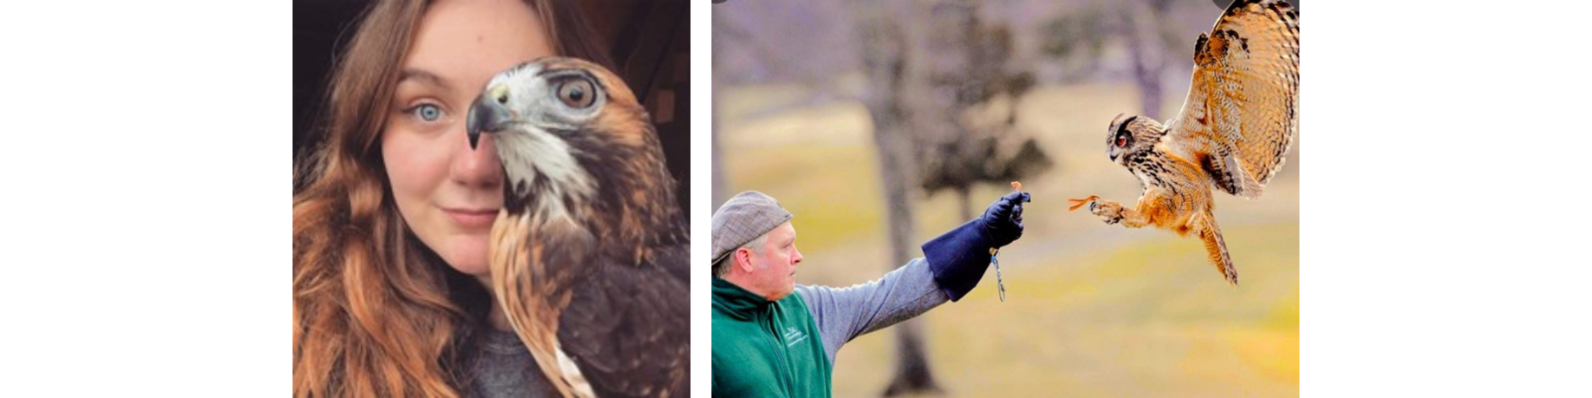 Two photos. First photo is a close up of a woman and a hawk. Second photo shows a man reaching out his arm for a large owl to land on it.